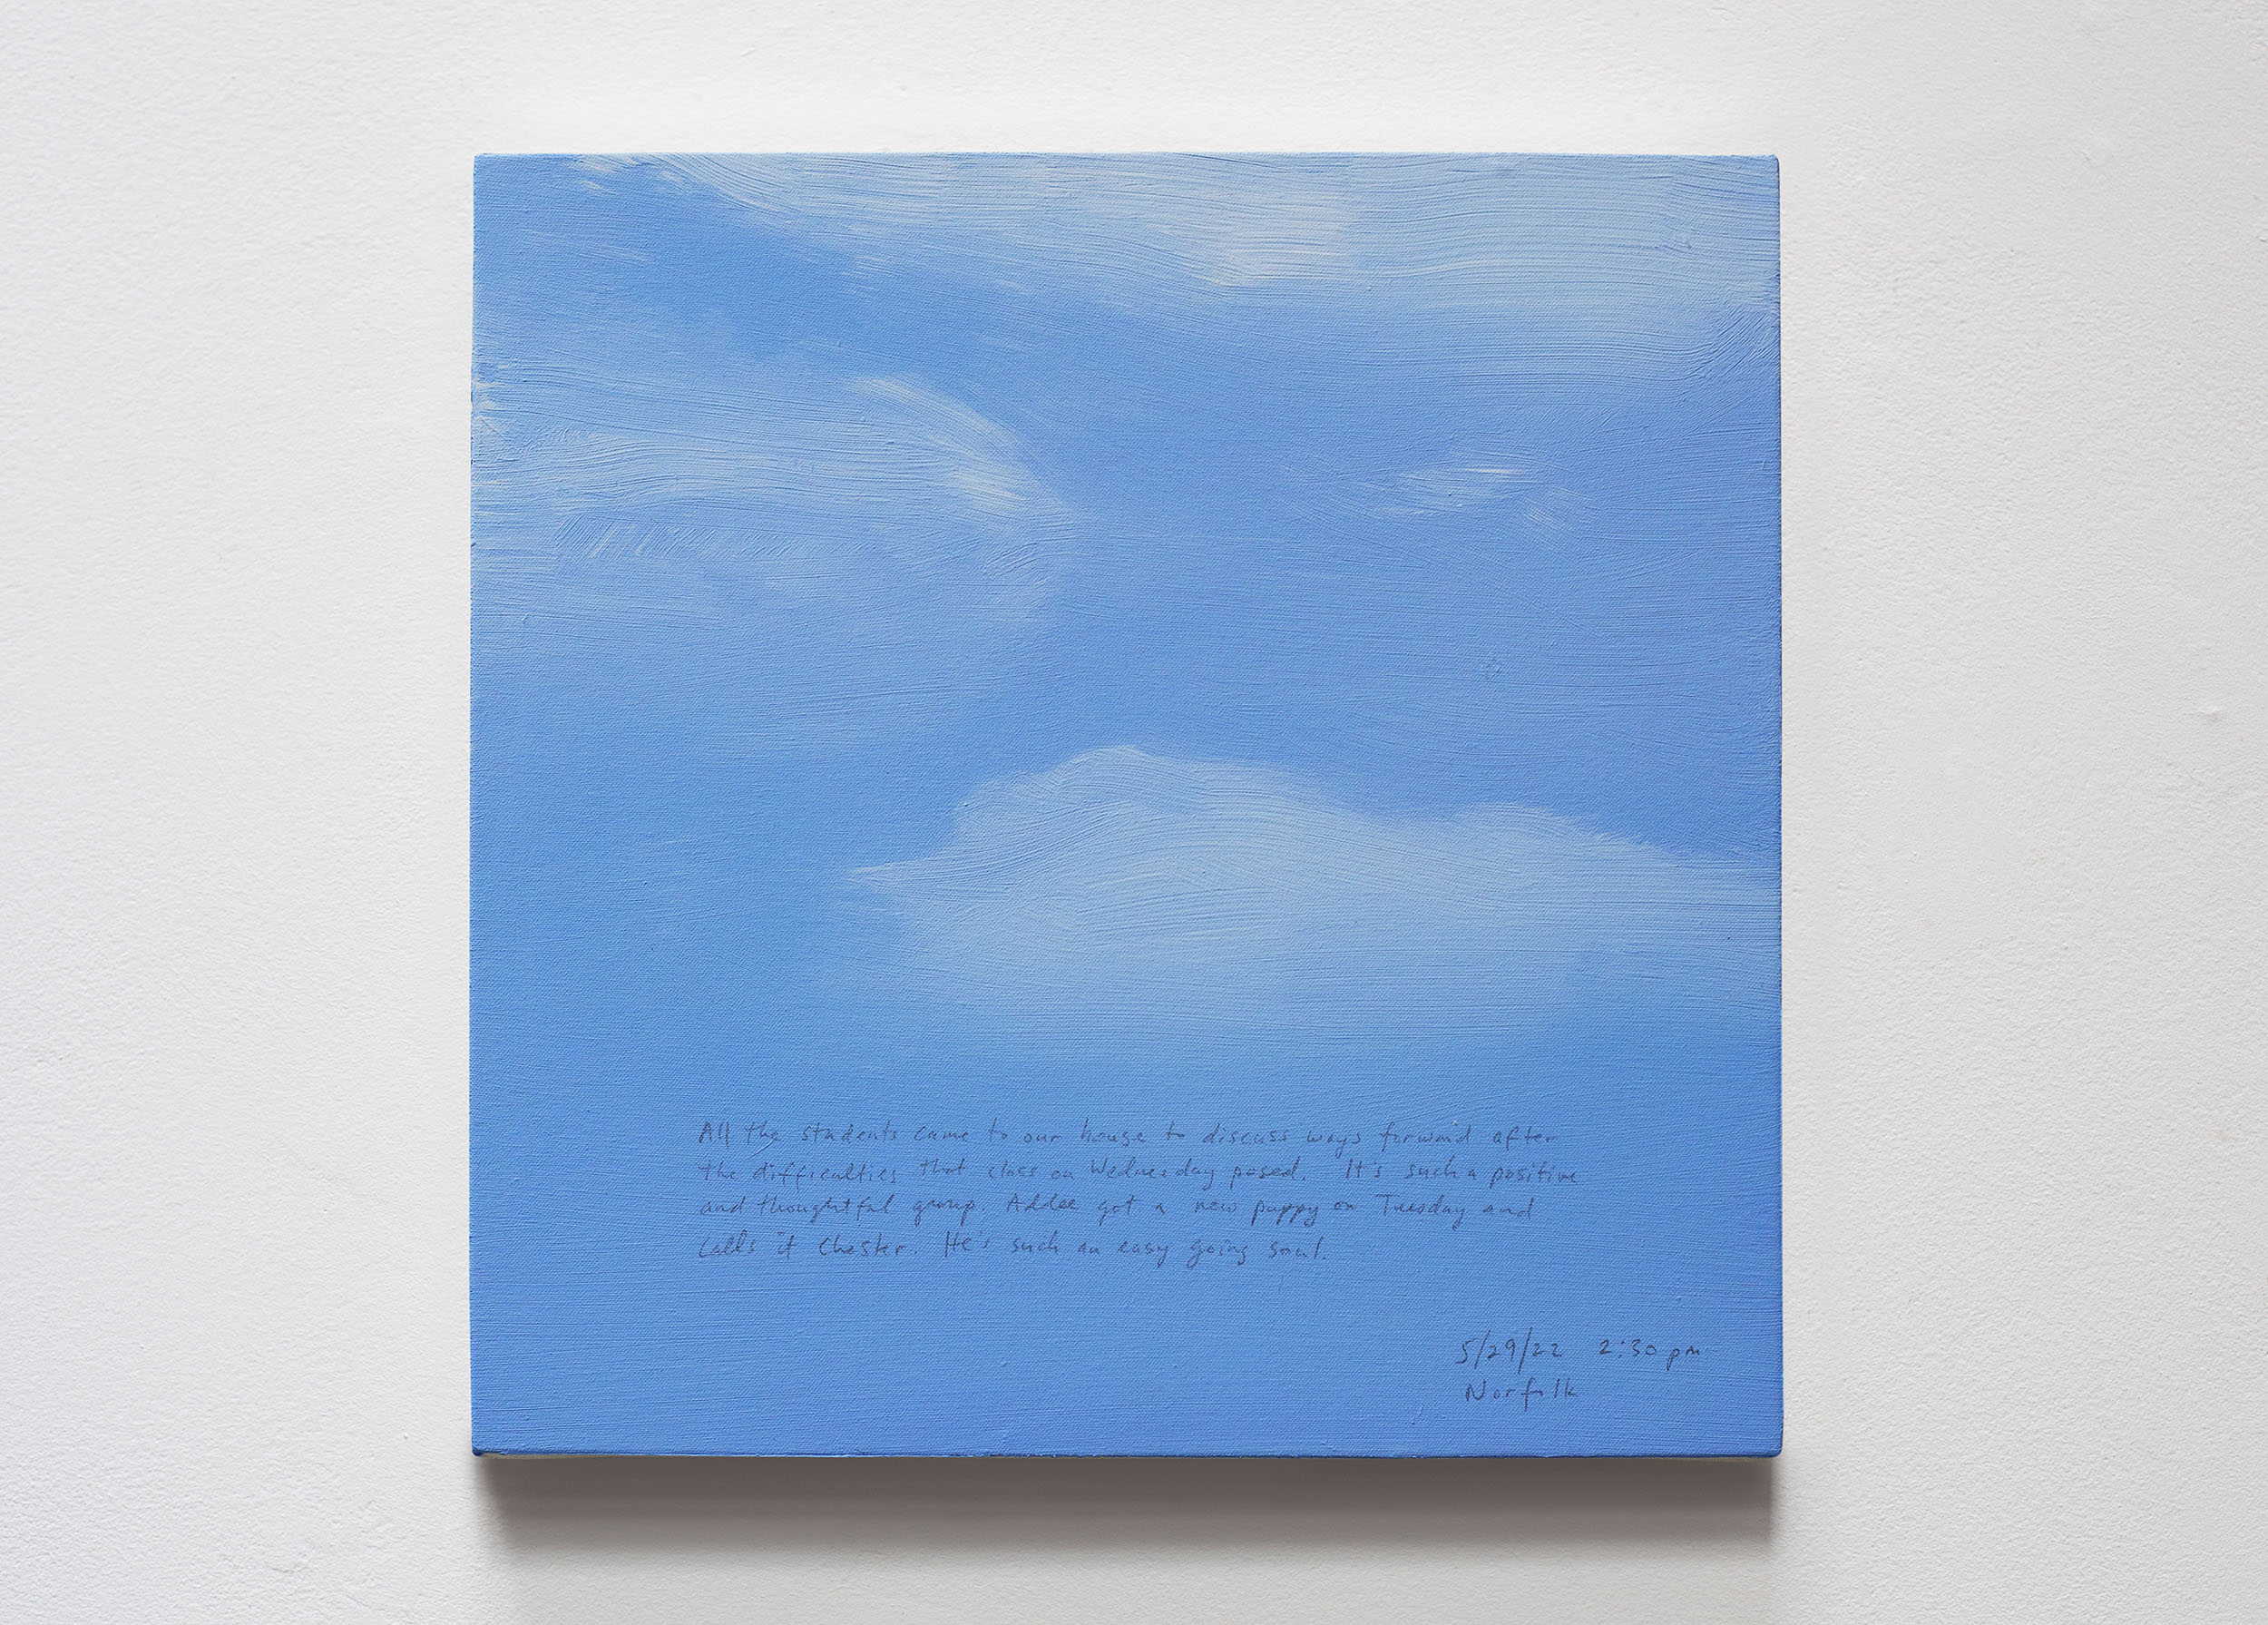 A 14 × 14 inch, acrylic painting of the sky. A journal entry is handwritten on the painting:

“All the students came to our house to discuss ways forward after the difficulties that class on Wednesday posed. It’s such a positive and thoughtful group. Addee got a new puppy on Tuesday and calls it Chester. He’s such an easy going soul.

5/29/22 2:30 pm
Norfolk”